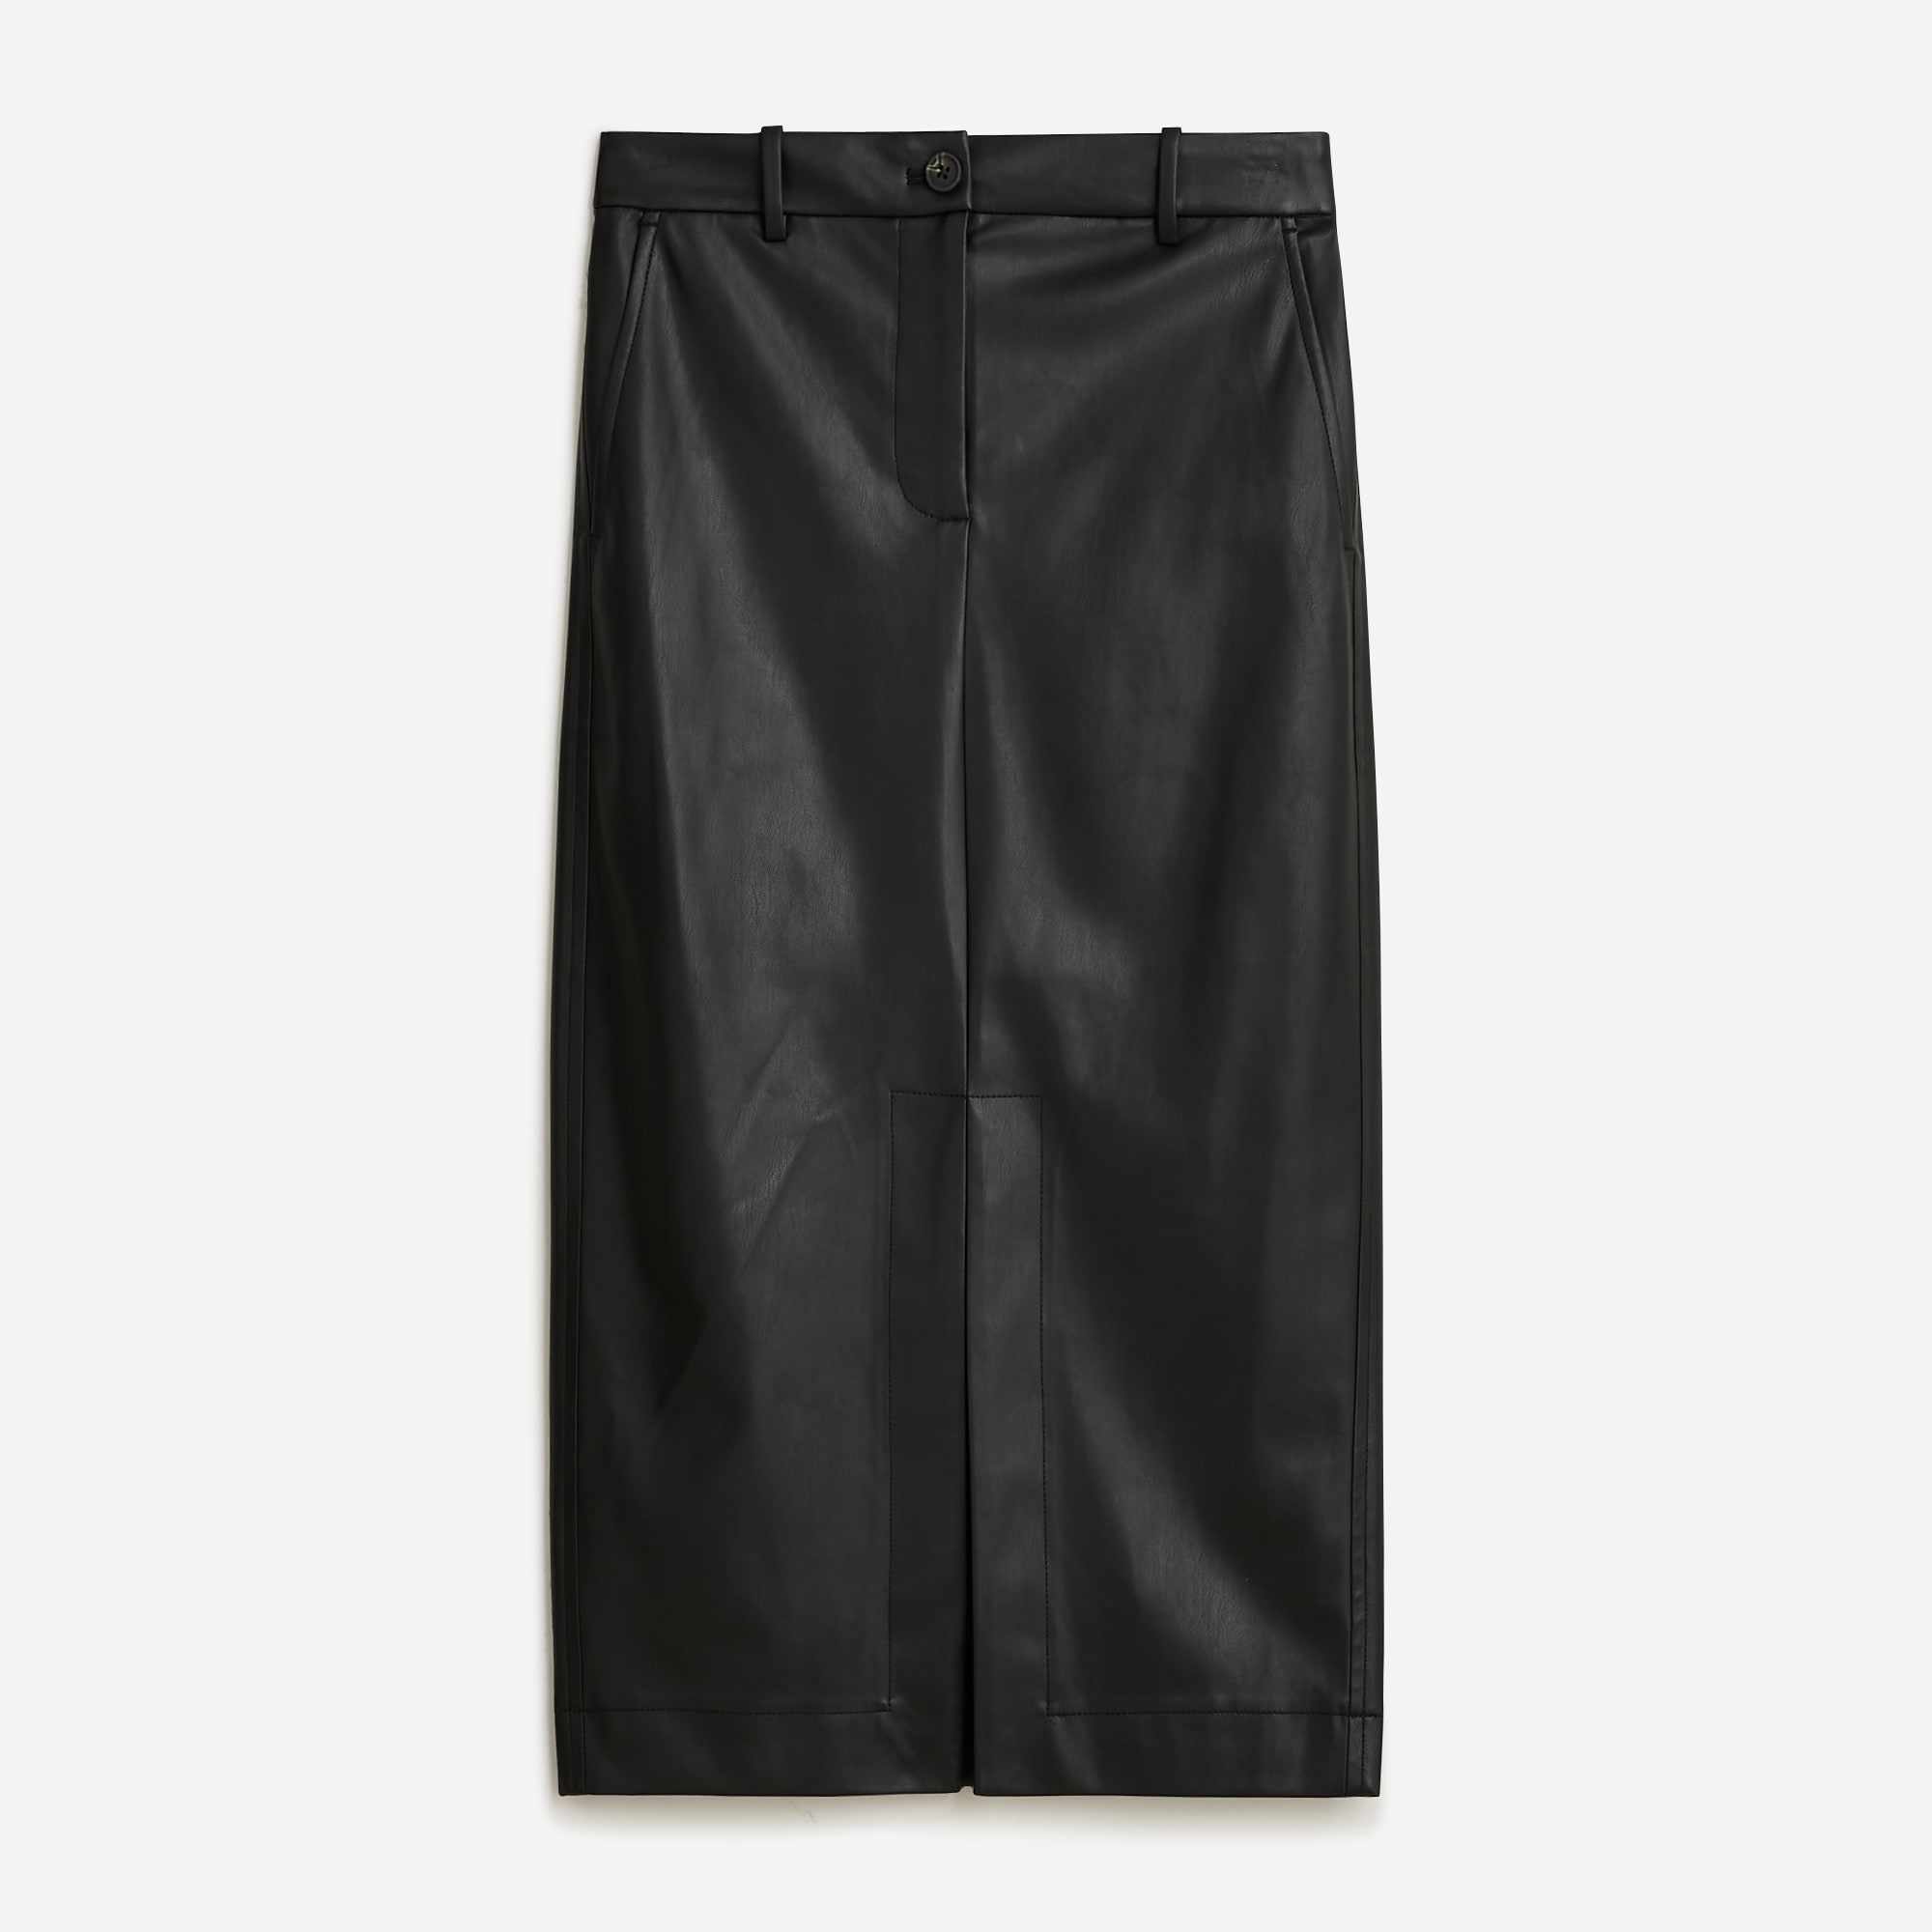  Faux-leather pencil skirt